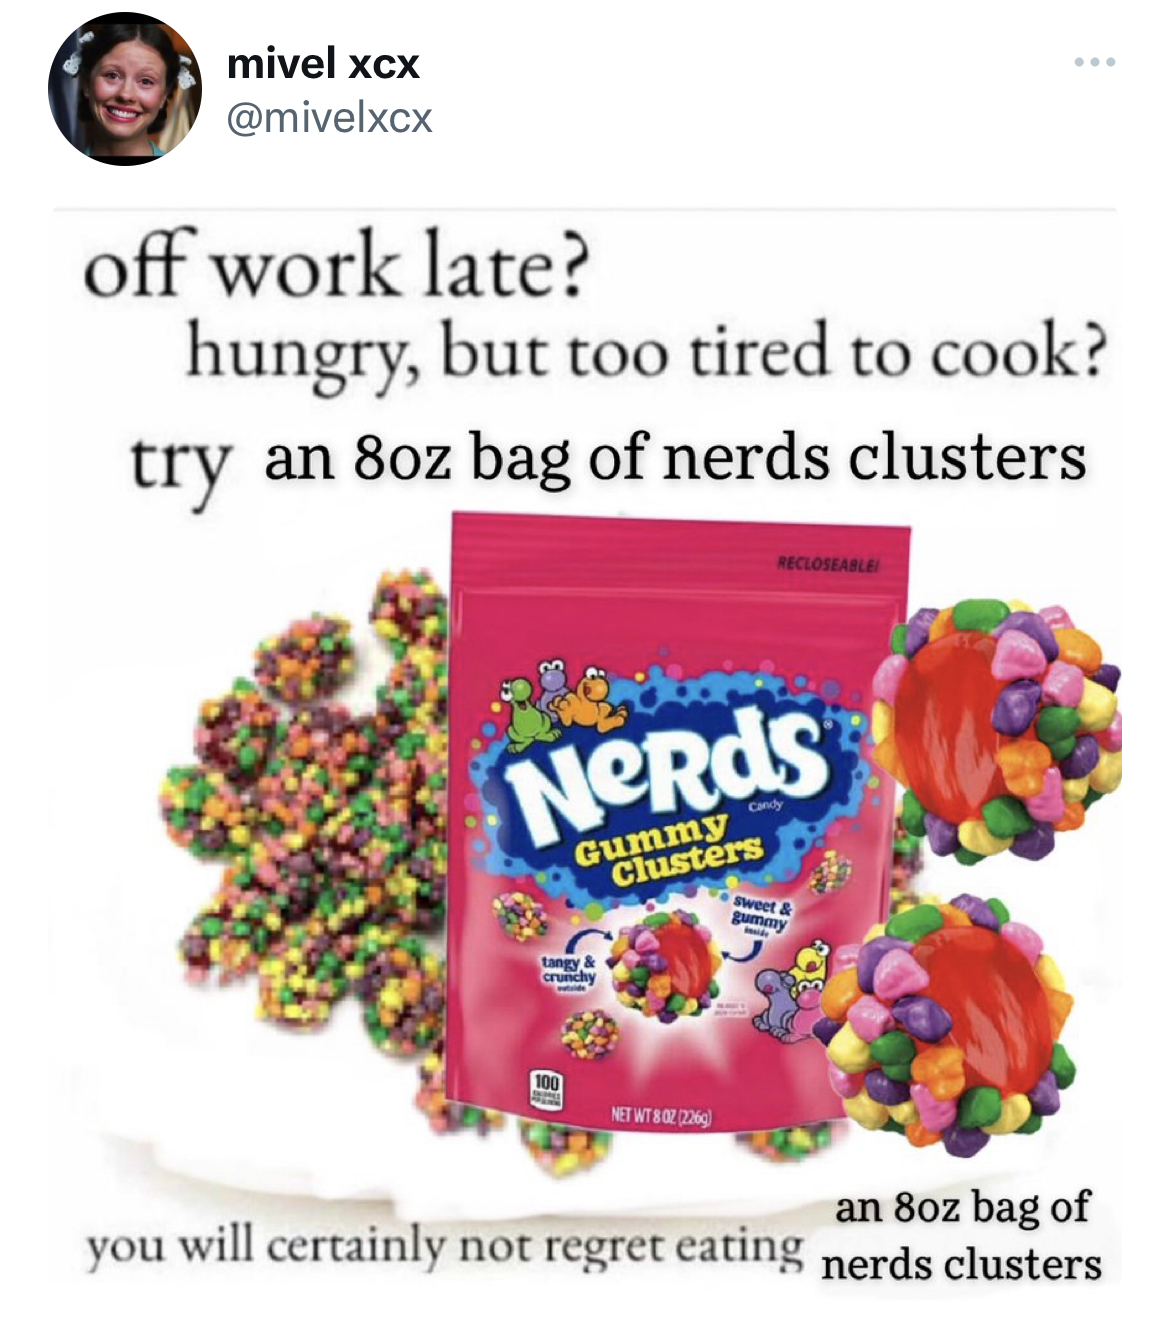 Savage Tweets - my life my rules - mivel xcx off work late? hungry, but too tired to cook? try an 8oz bag of nerds clusters Gummy Clusters Tat Pecionable sweet an 8oz bag of you will certainly not regret eating nerds clusters